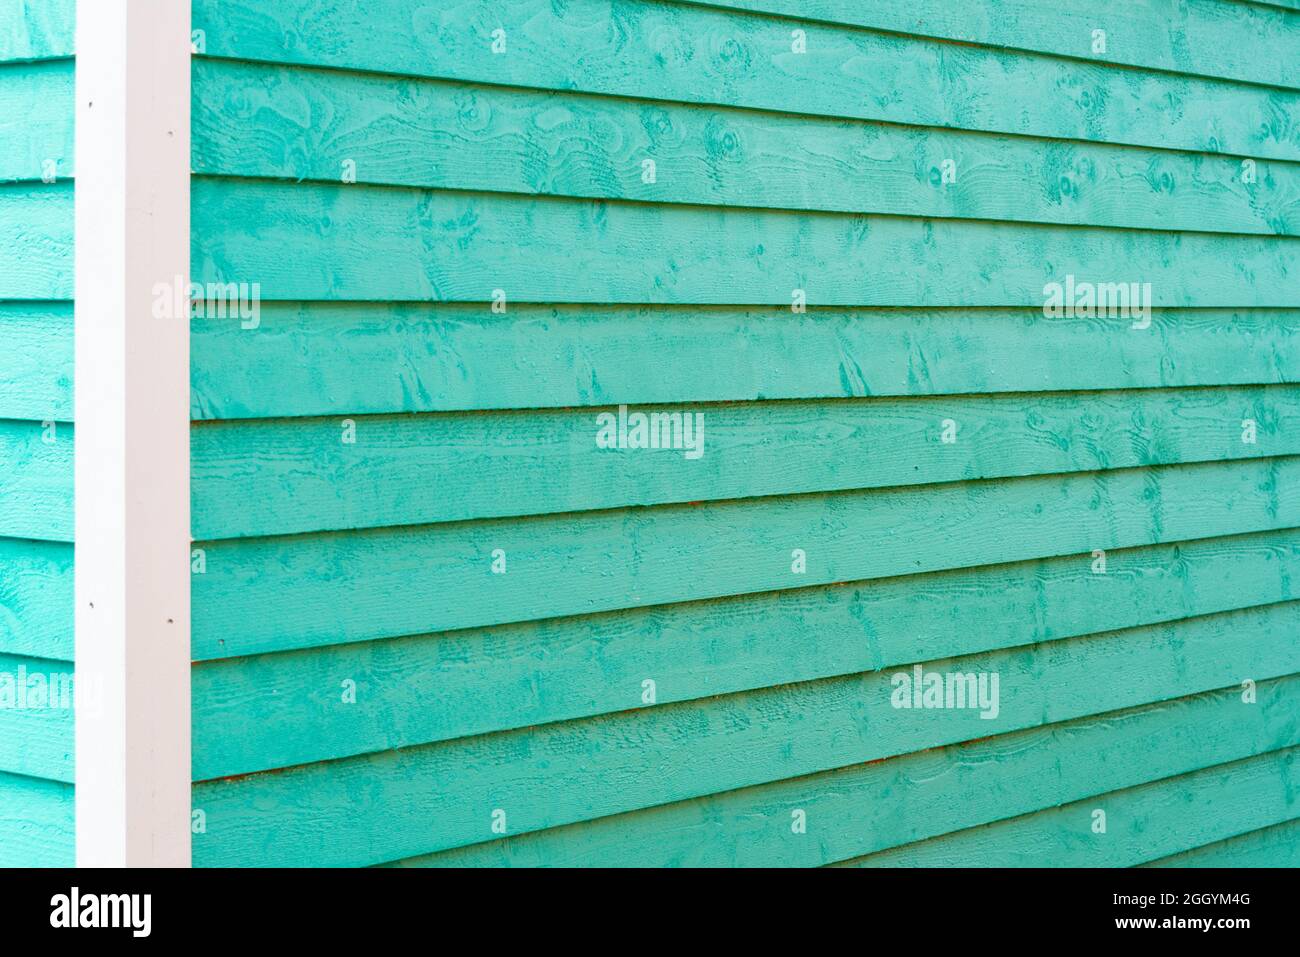 The exterior of a bright teal green narrow wooden horizontal clapboard wall of a vintage house. The trim on the building is white in color. Stock Photo